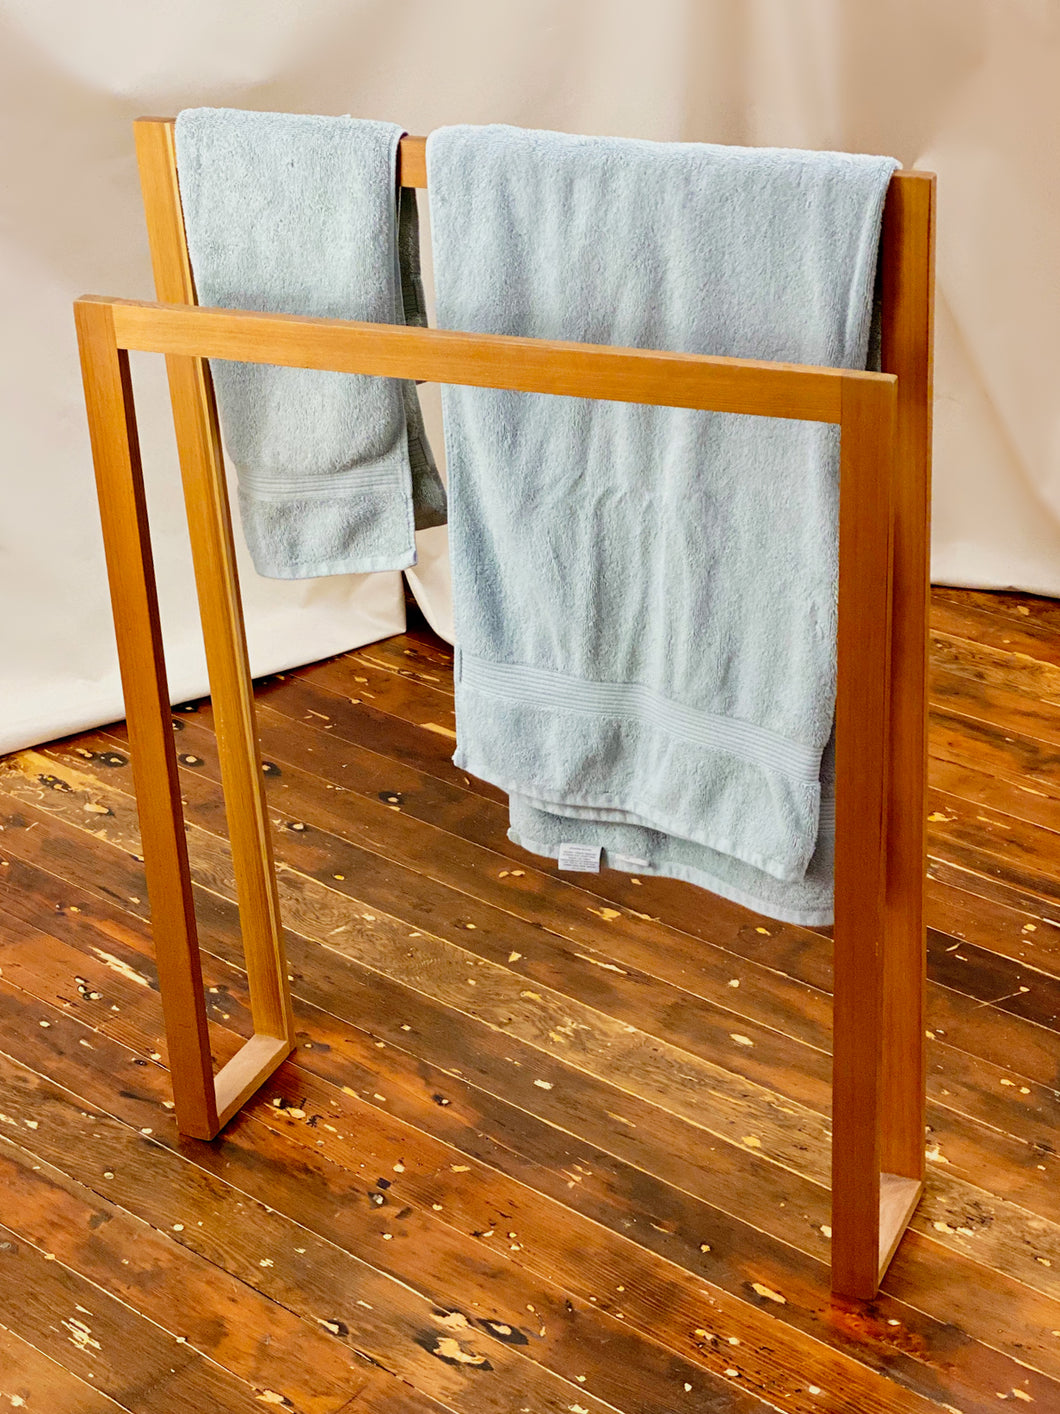 The Clothes Horse